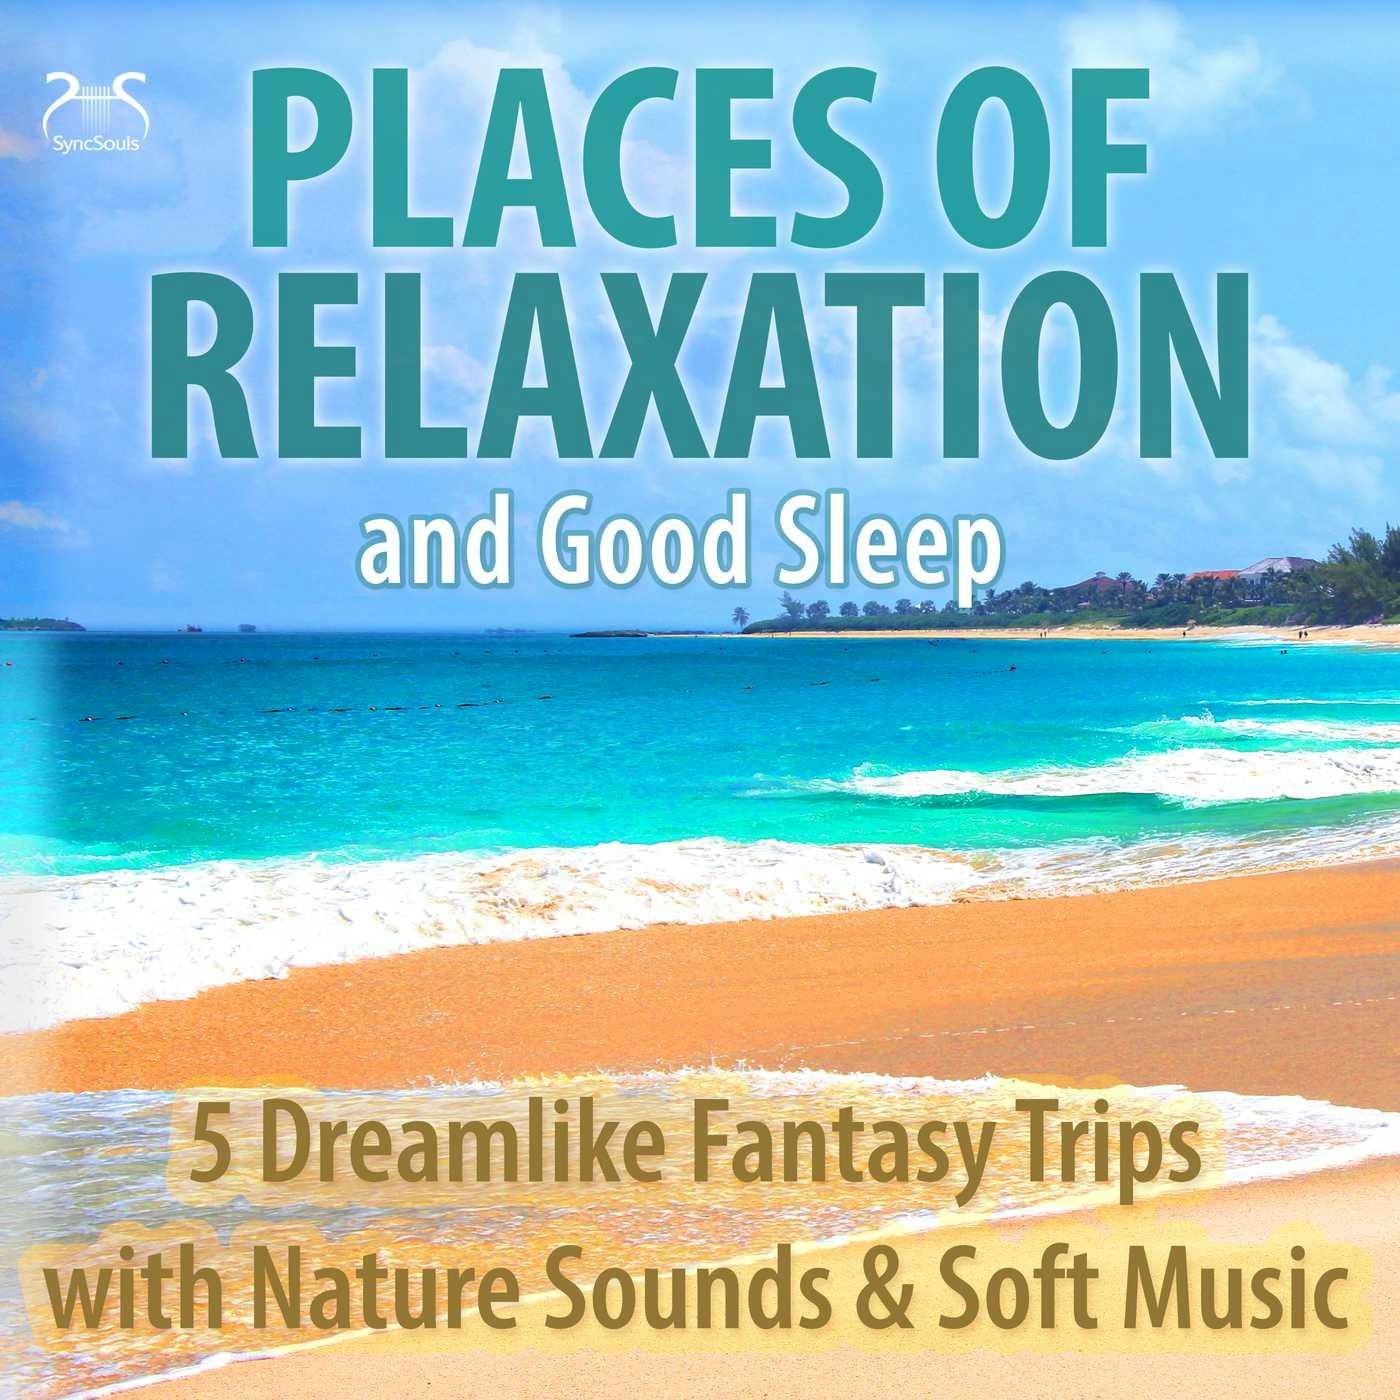 Places of Relaxation and Good Sleep - 5 Dreamlike Fantasy Trips with Nature Sounds & Soft Music - undefined